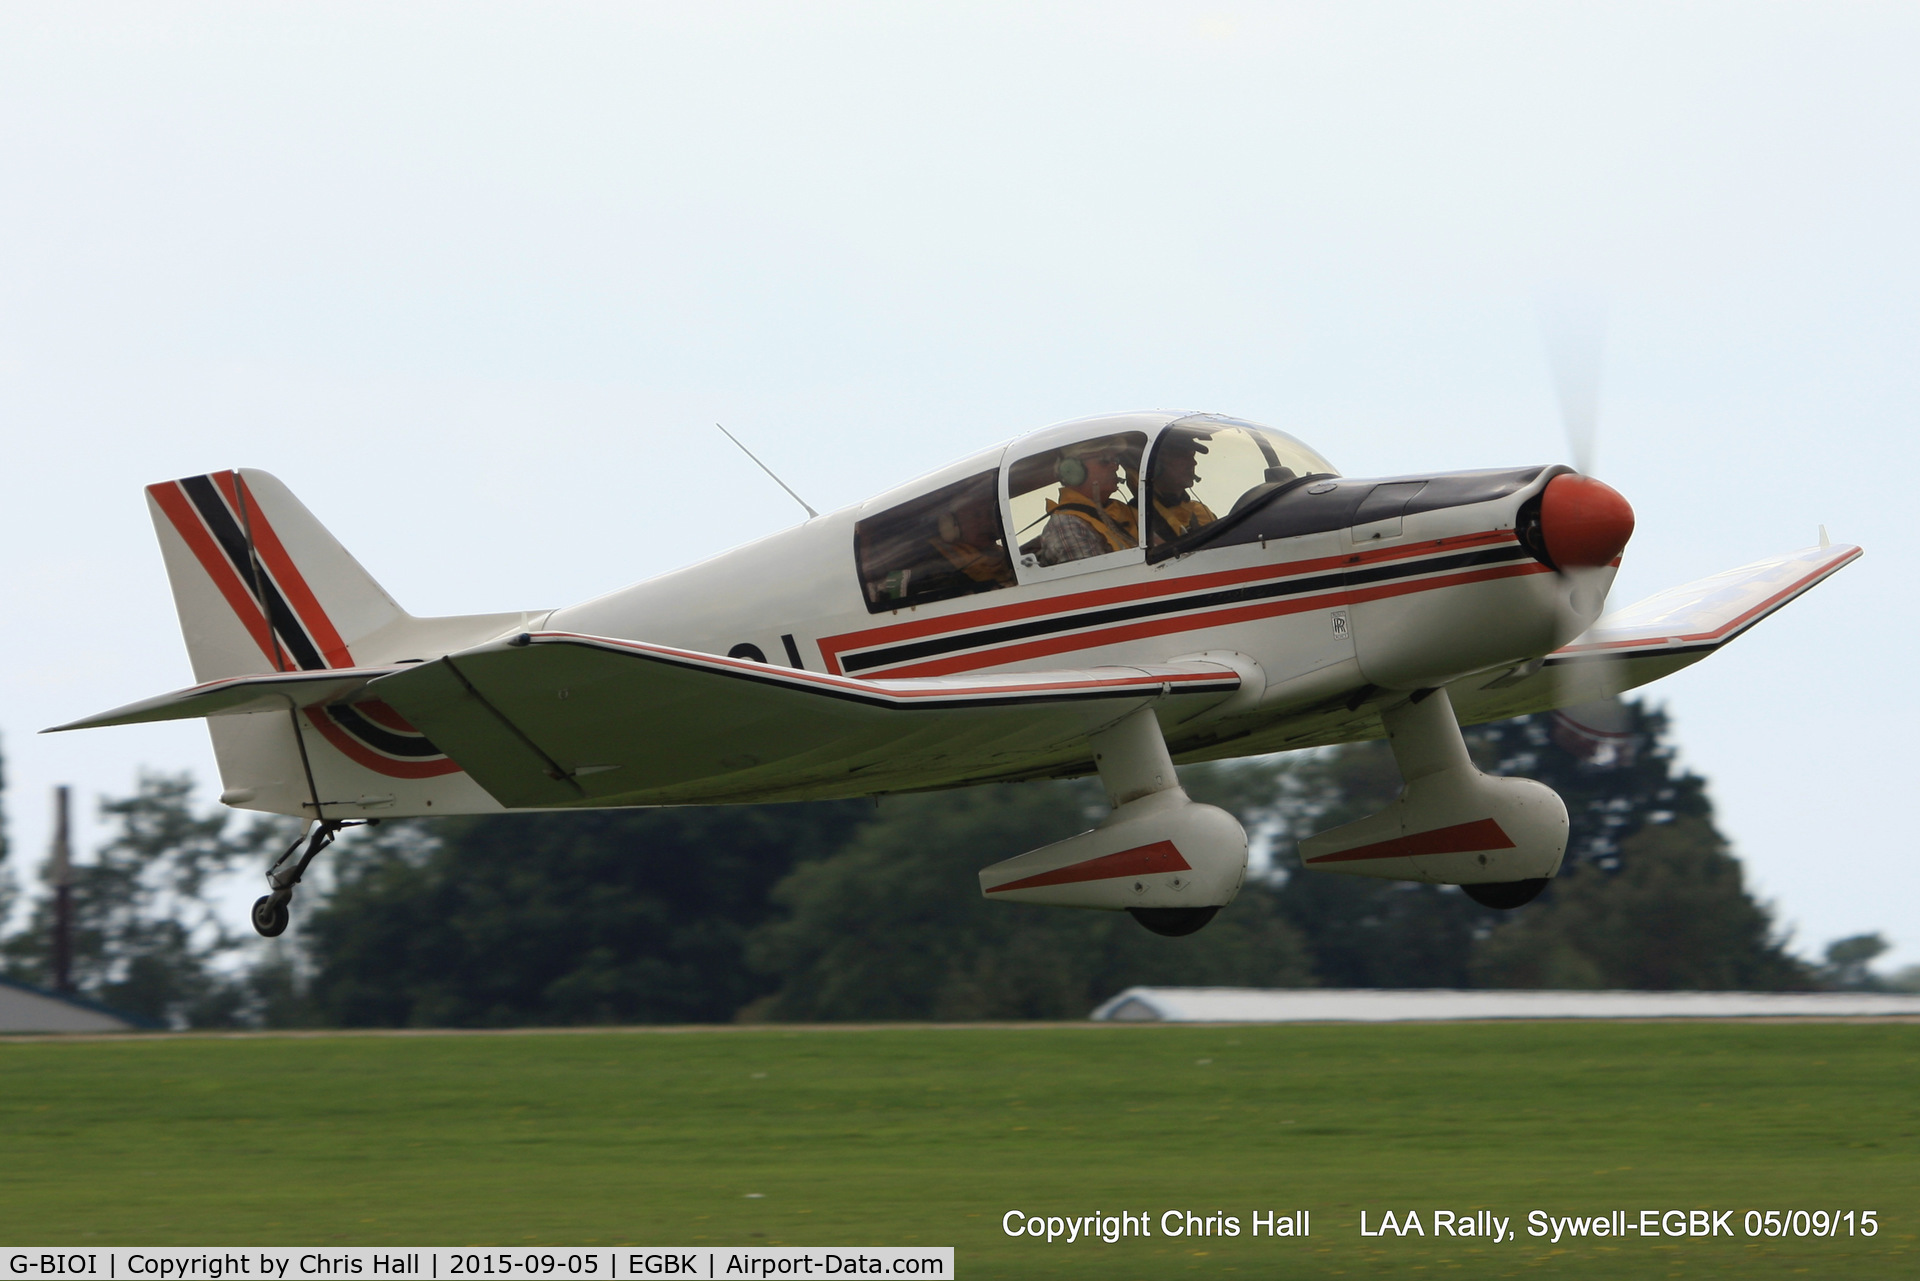 G-BIOI, 1964 SAN Jodel DR-1050M Excellence C/N 477, at the LAA Rally 2015, Sywell